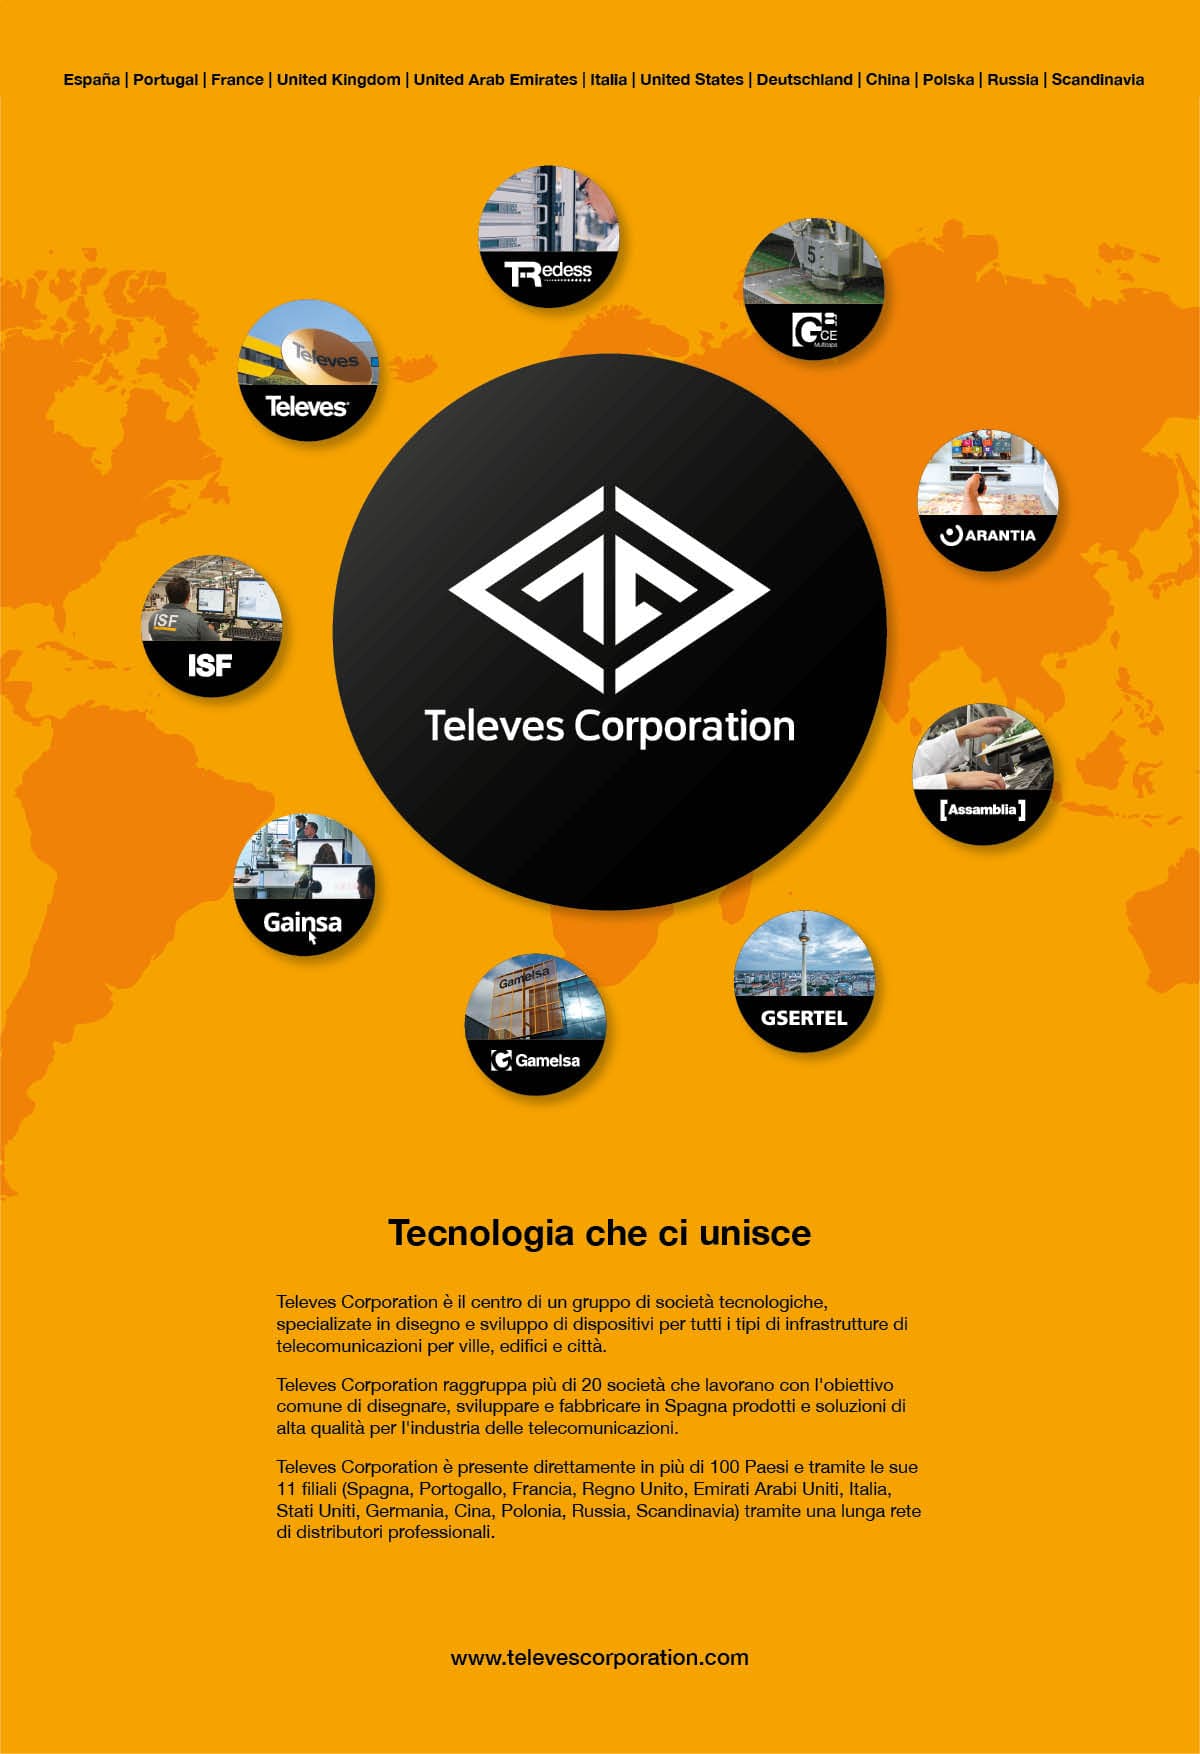 Televes Corporation